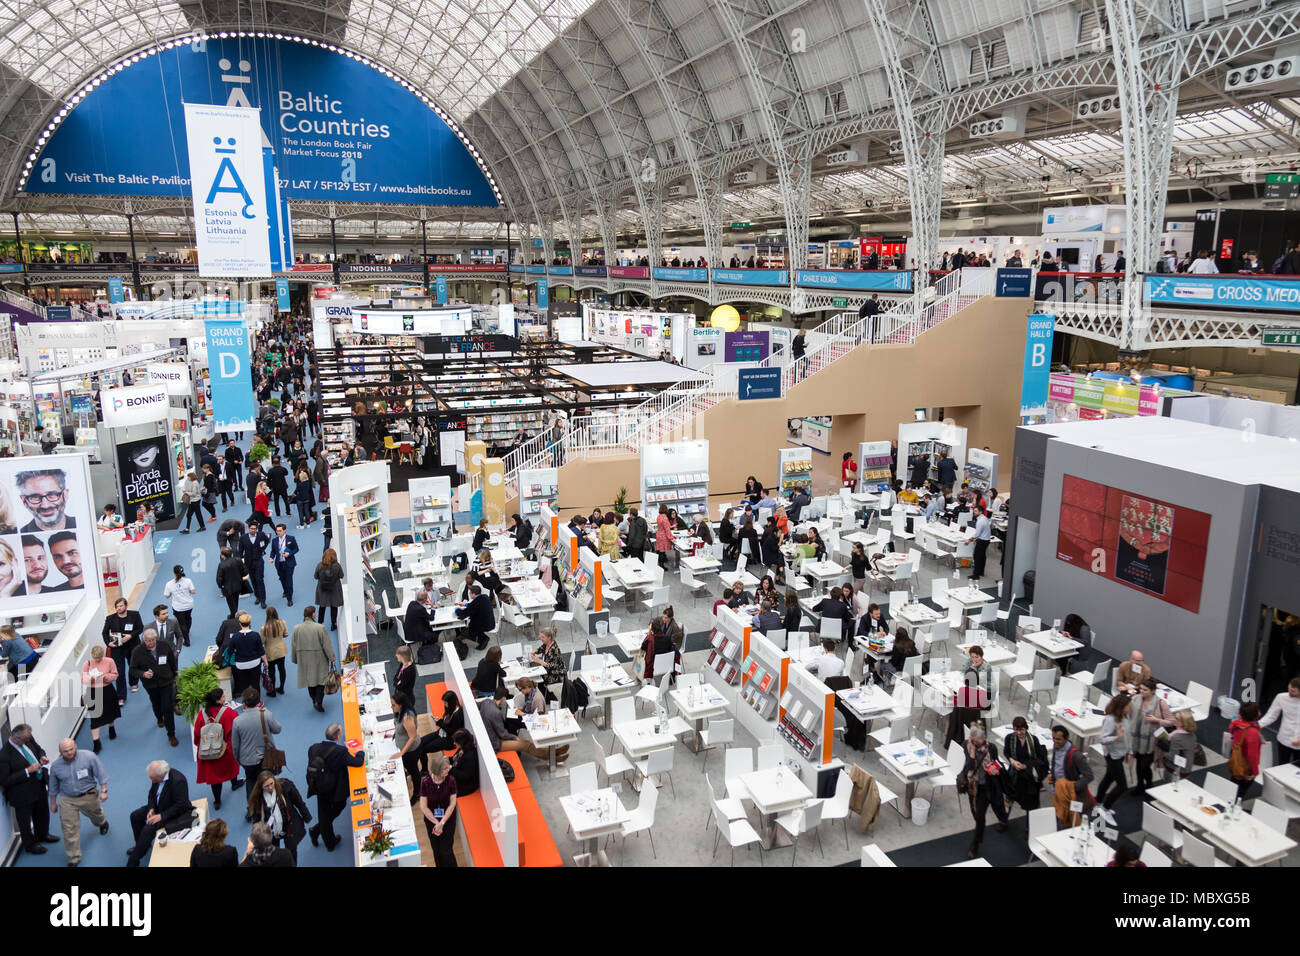 London, UK, April 12, 2018: Crowds of visitors and hundreds of exhibitors and events during the 2018 London Book Fair in Olympia Exhibition Centre in London. Credit: Michal Busko/Alamy Live News Stock Photo